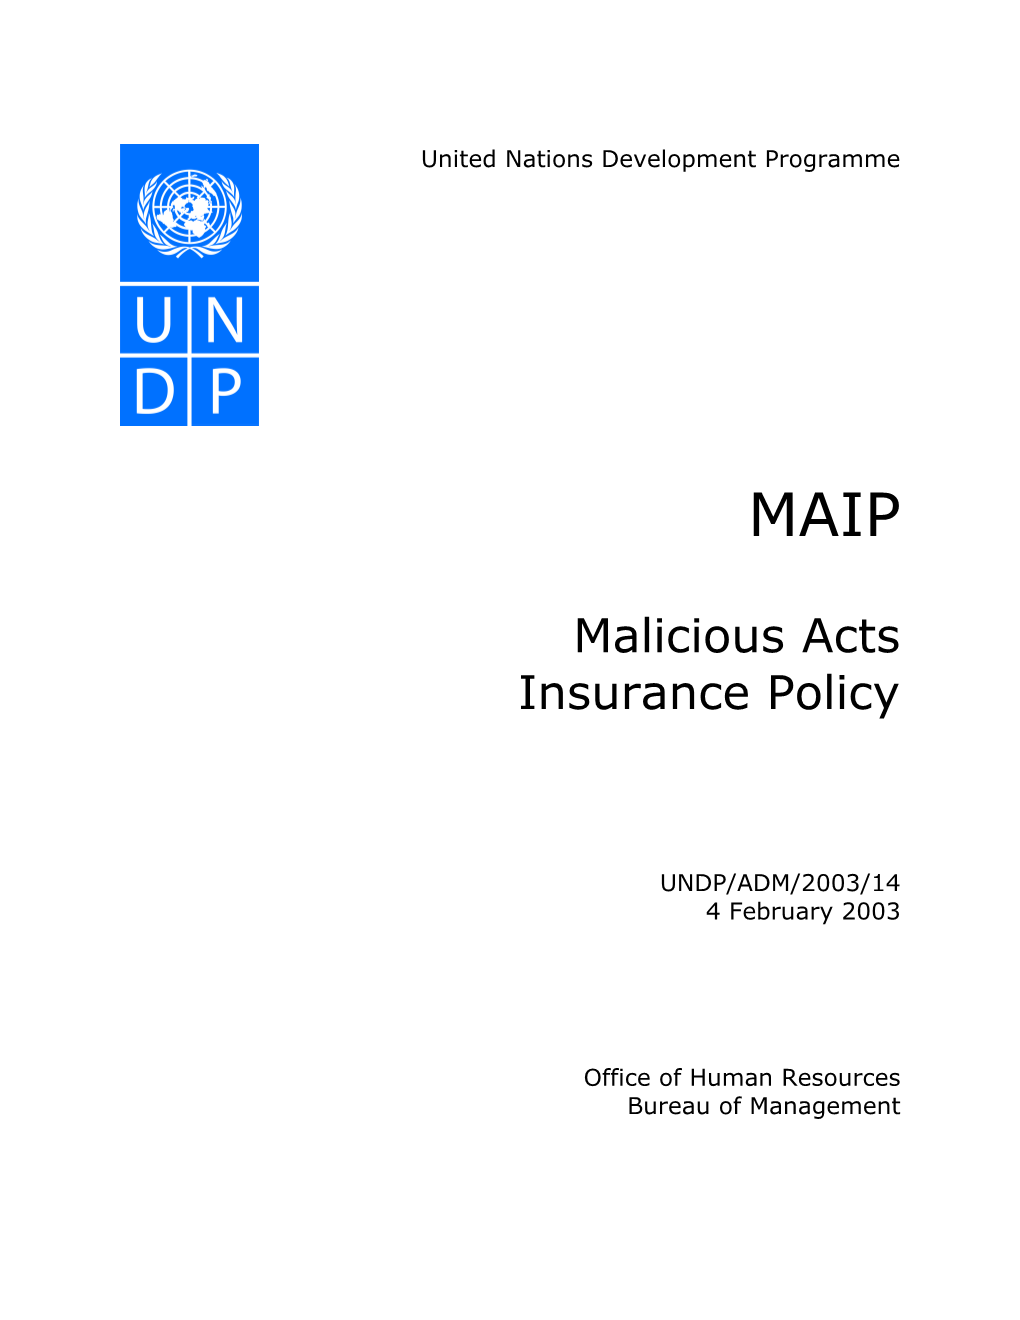 Malicious Acts Insurance Policy (MAIP)